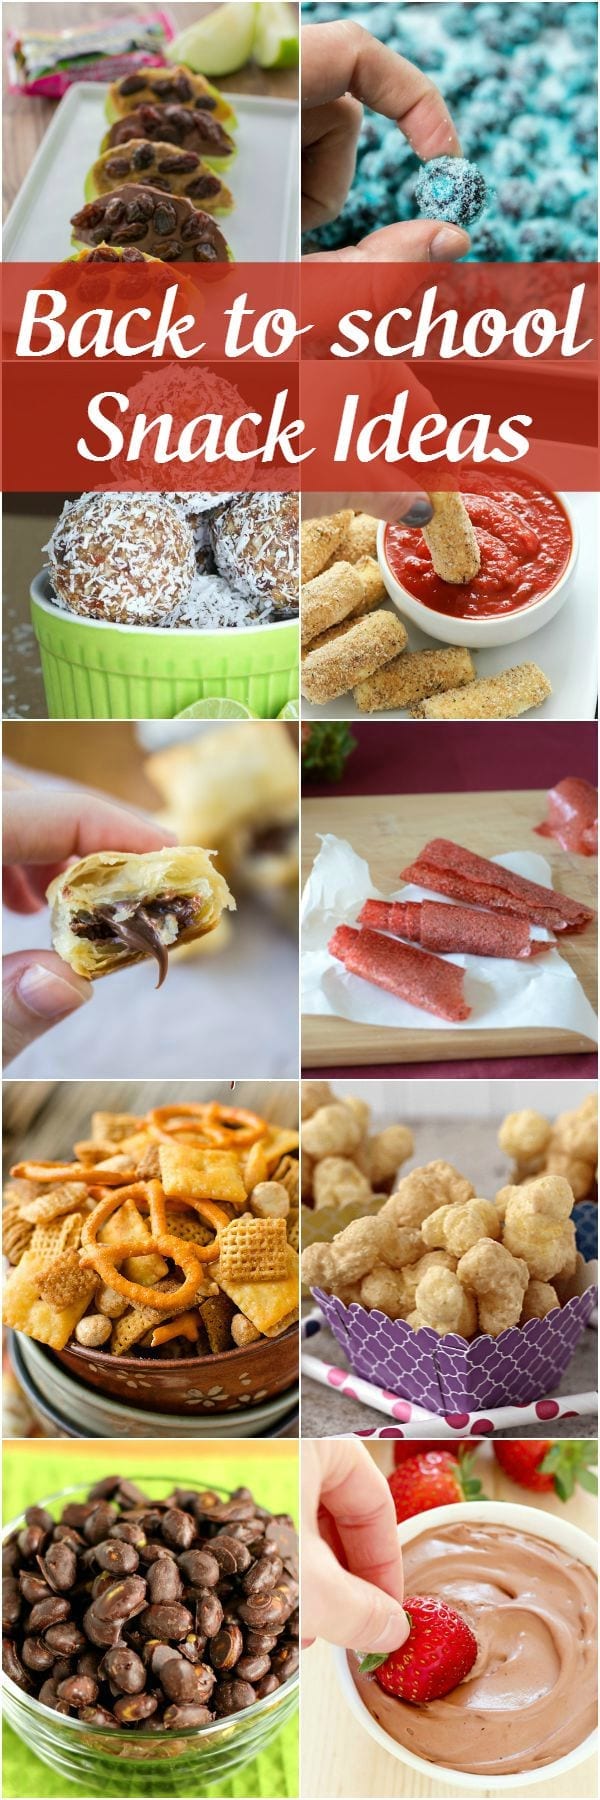 Back to school snack ideas you need to try!  So many great ideas that are quick, easy and totally tasty {via yummyhealthyeasy.com}